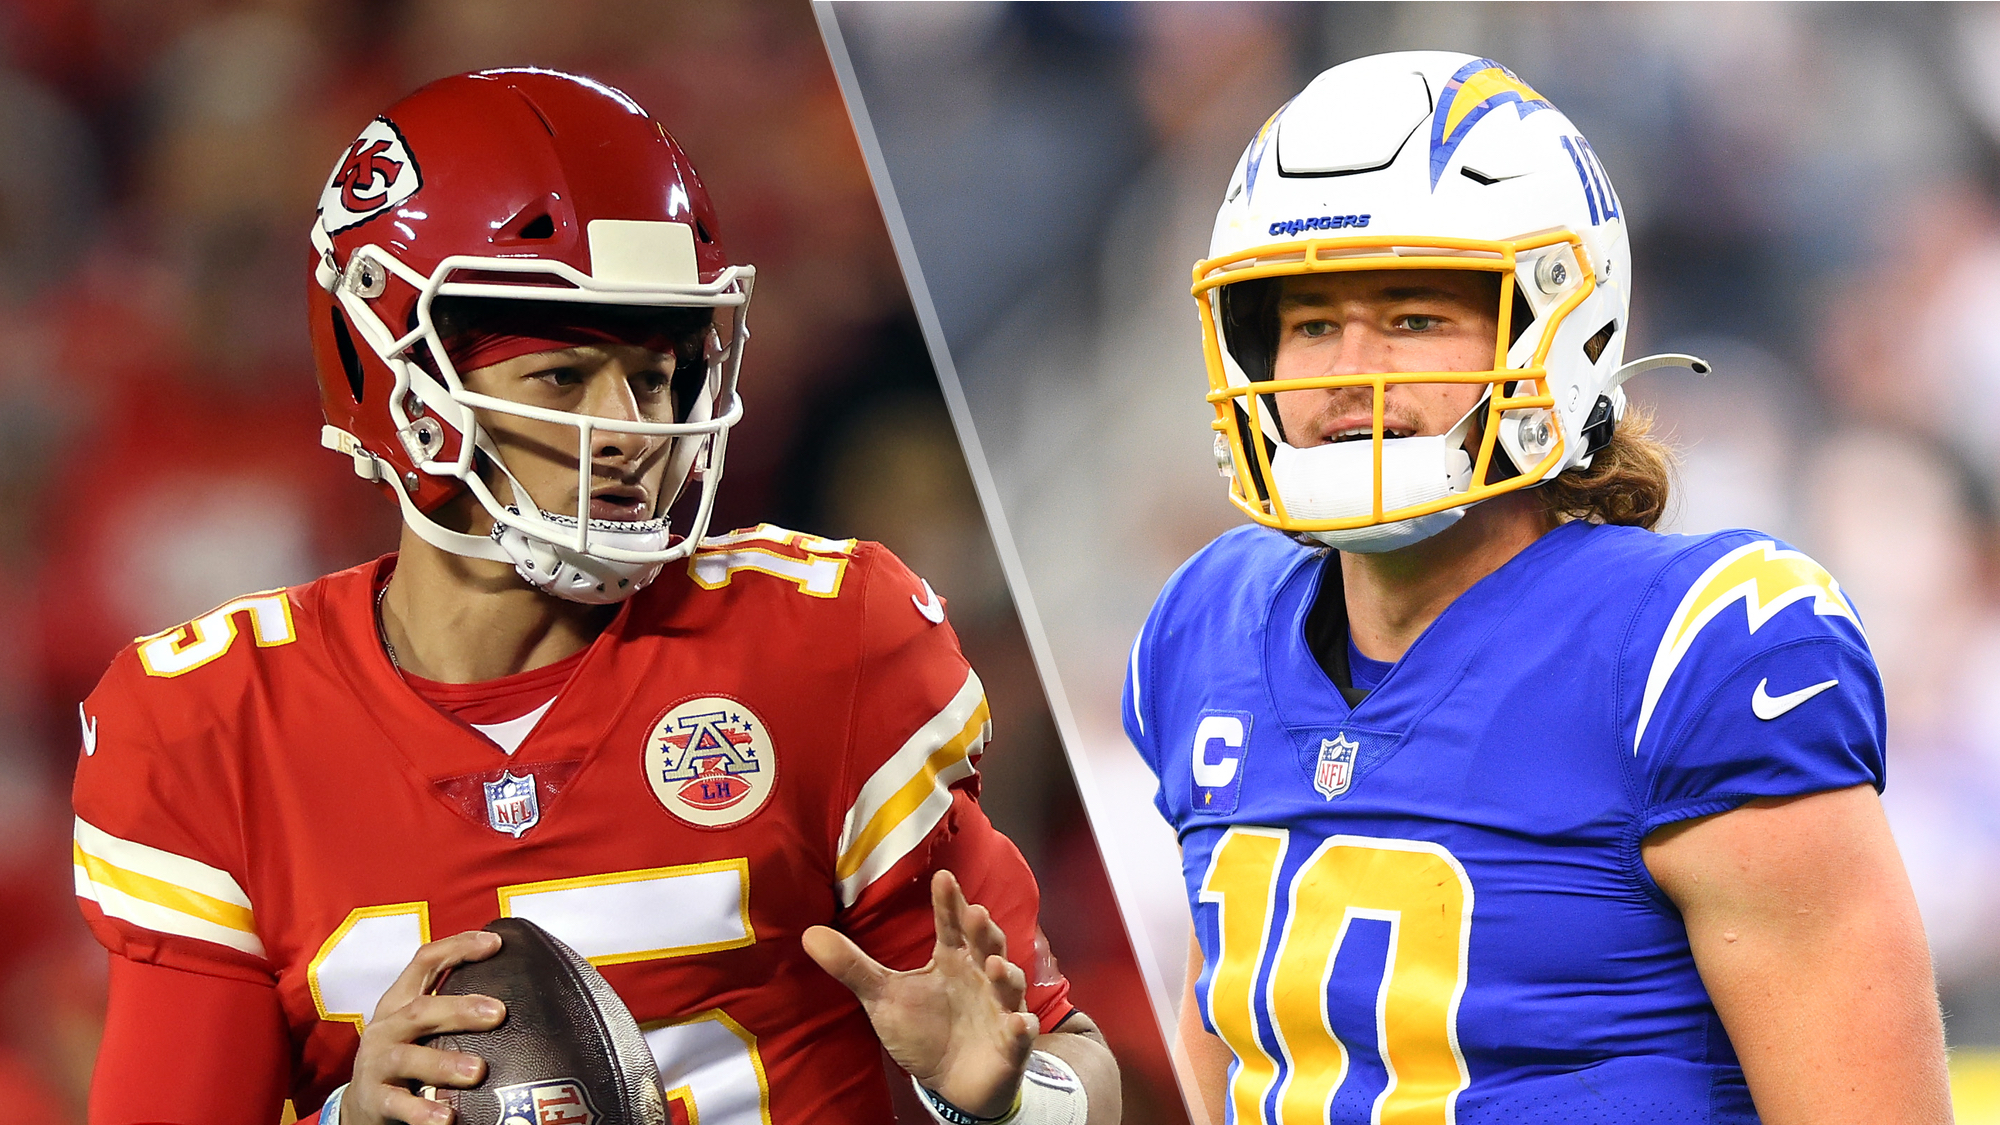 Chiefs vs Chargers live stream is tonight: How to watch Thursday